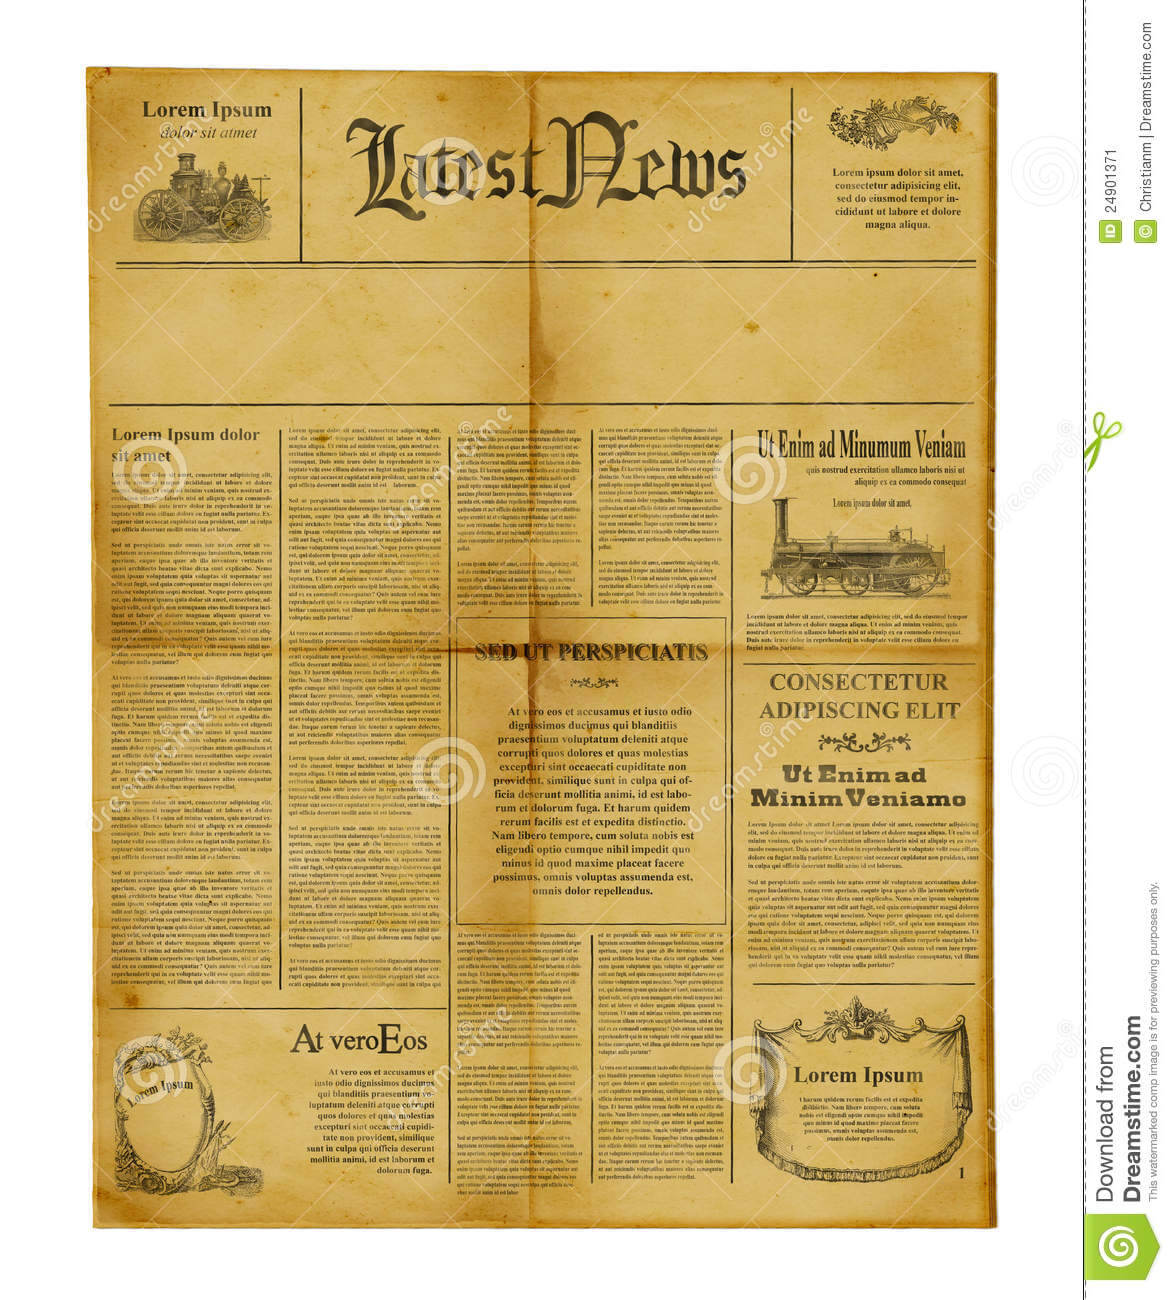 Antique Newspaper Template Stock Image. Image Of Information For Old Blank Newspaper Template